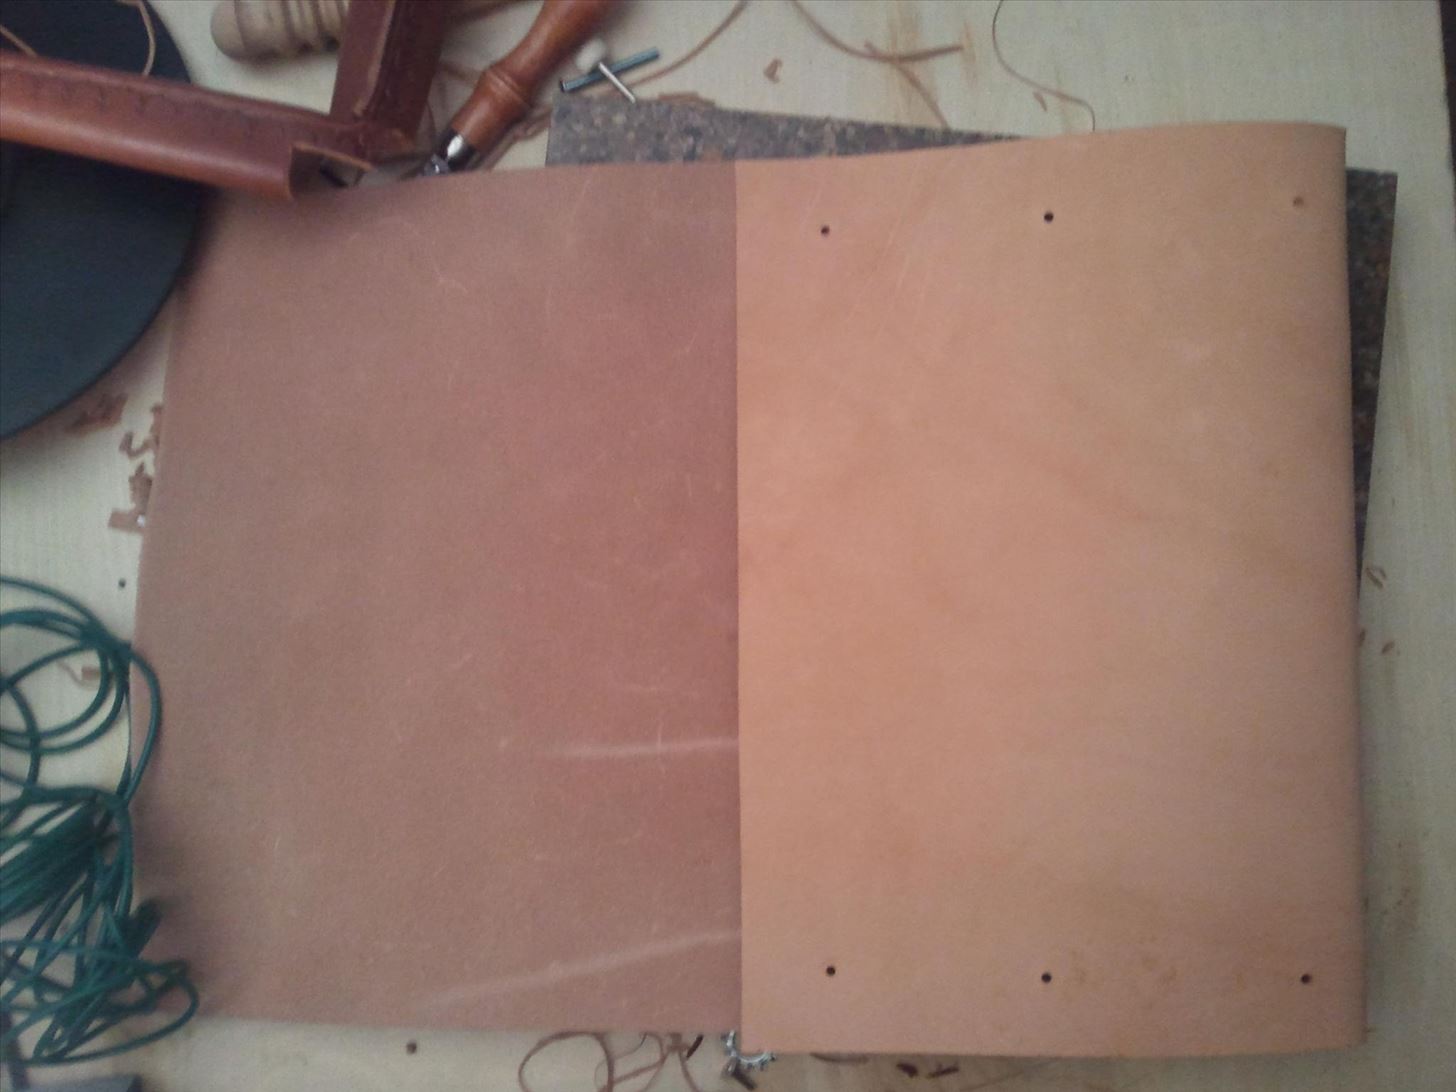 How to Make a Super-Simple Steampunk iPad Case Out of Leather